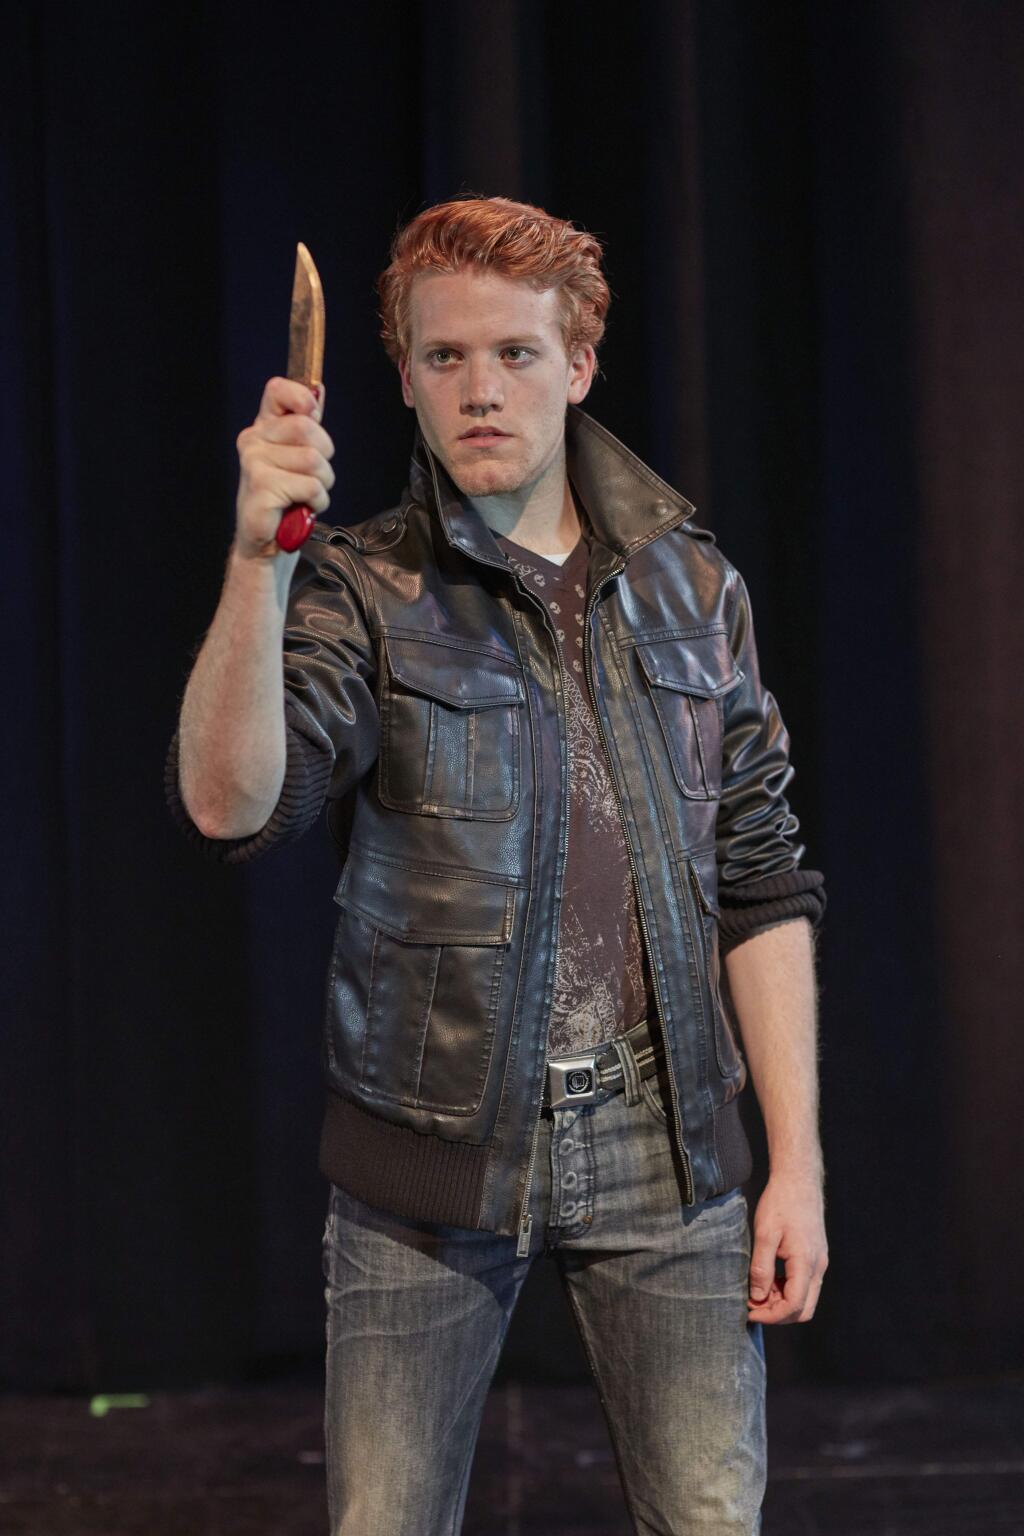 DAVID PAPASSonoma State University Dept. of Theatre Arts & Dance presents 'Hamlet' from May 4 to May 8, 2016. Matt Lindberg is pictured as Hamlet. Photo by David Papas